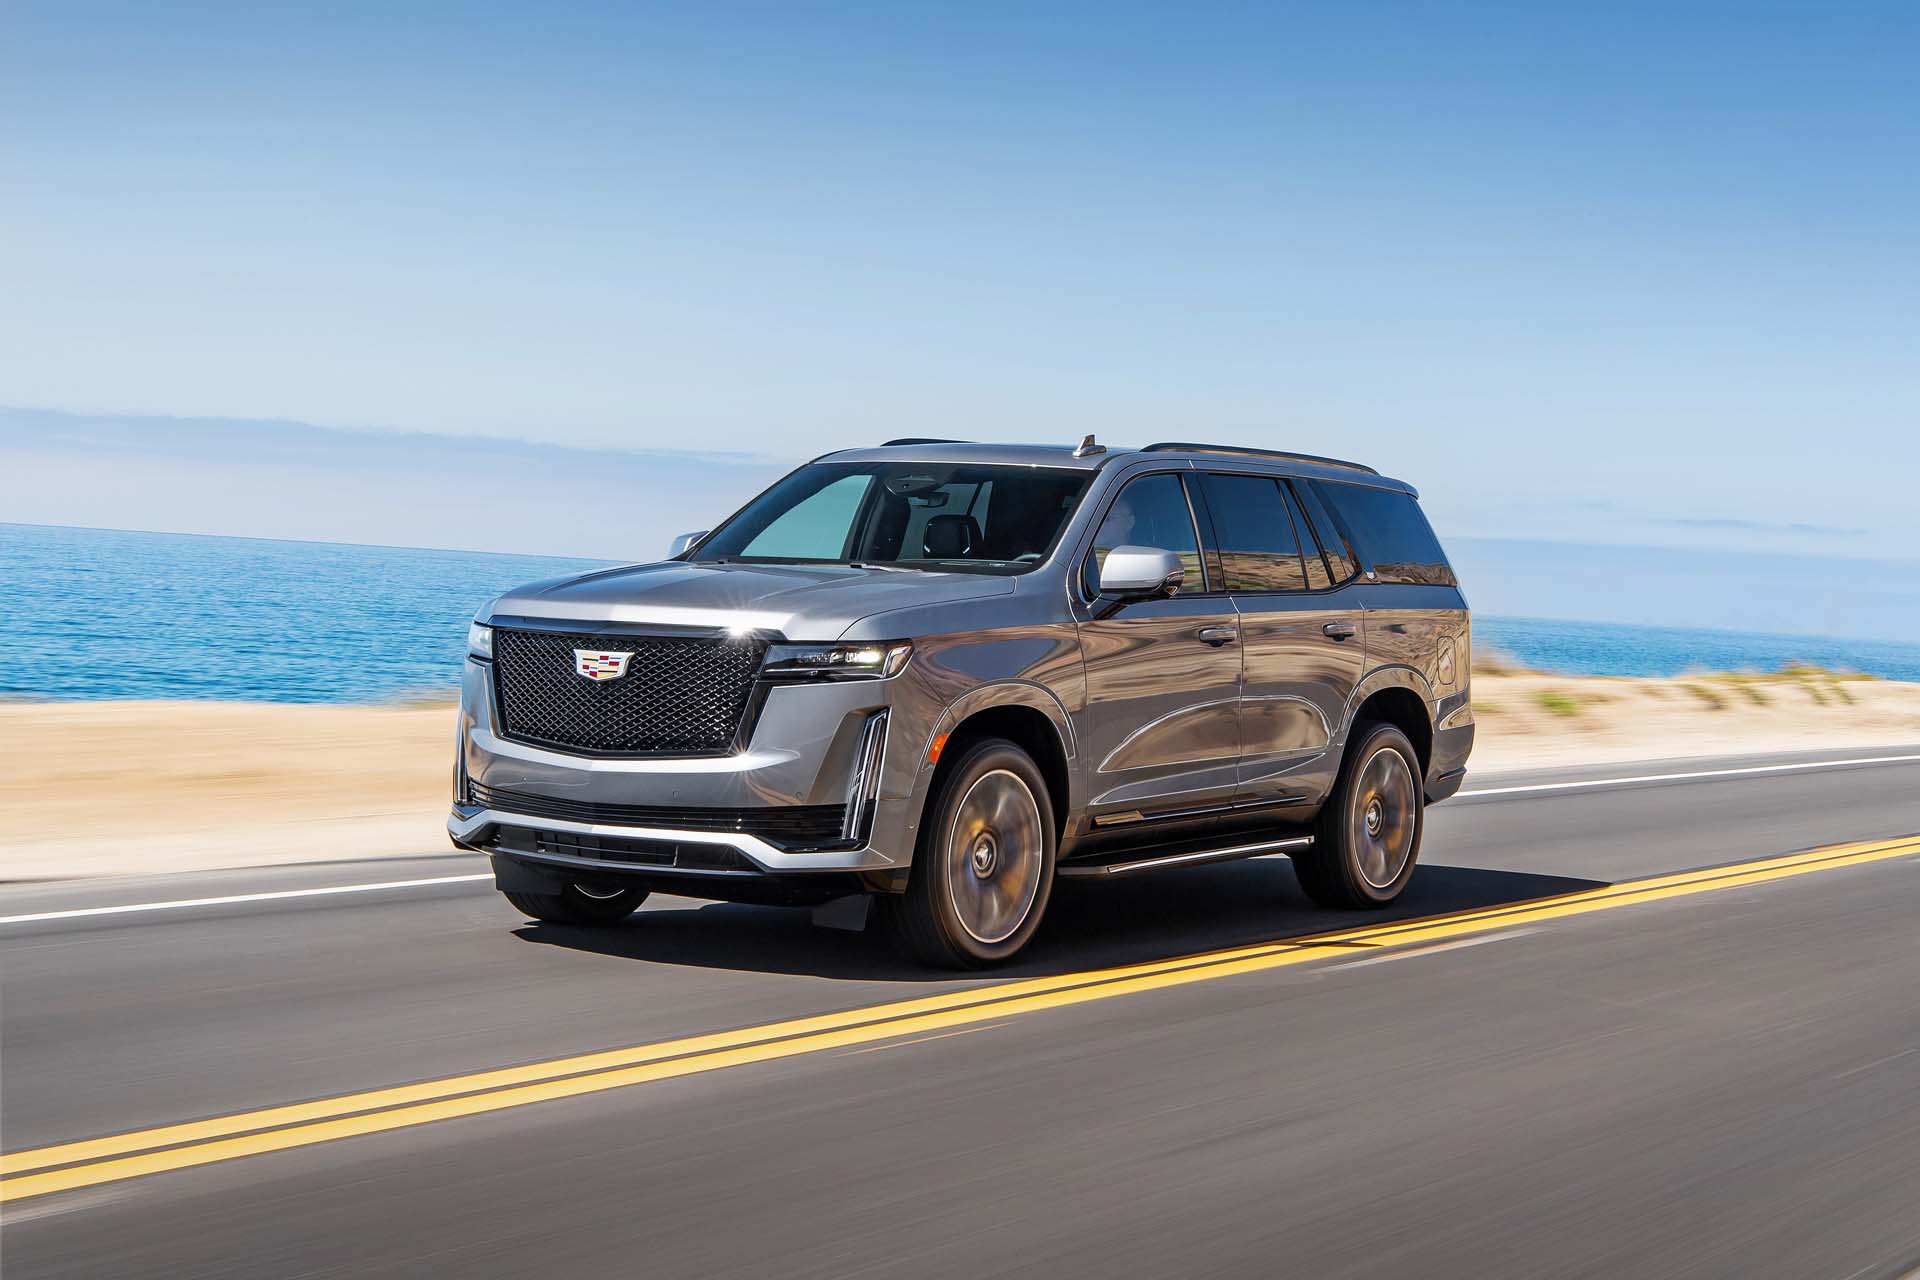 New And Used Cadillac Escalade Prices Photos Reviews Specs The Car Connection